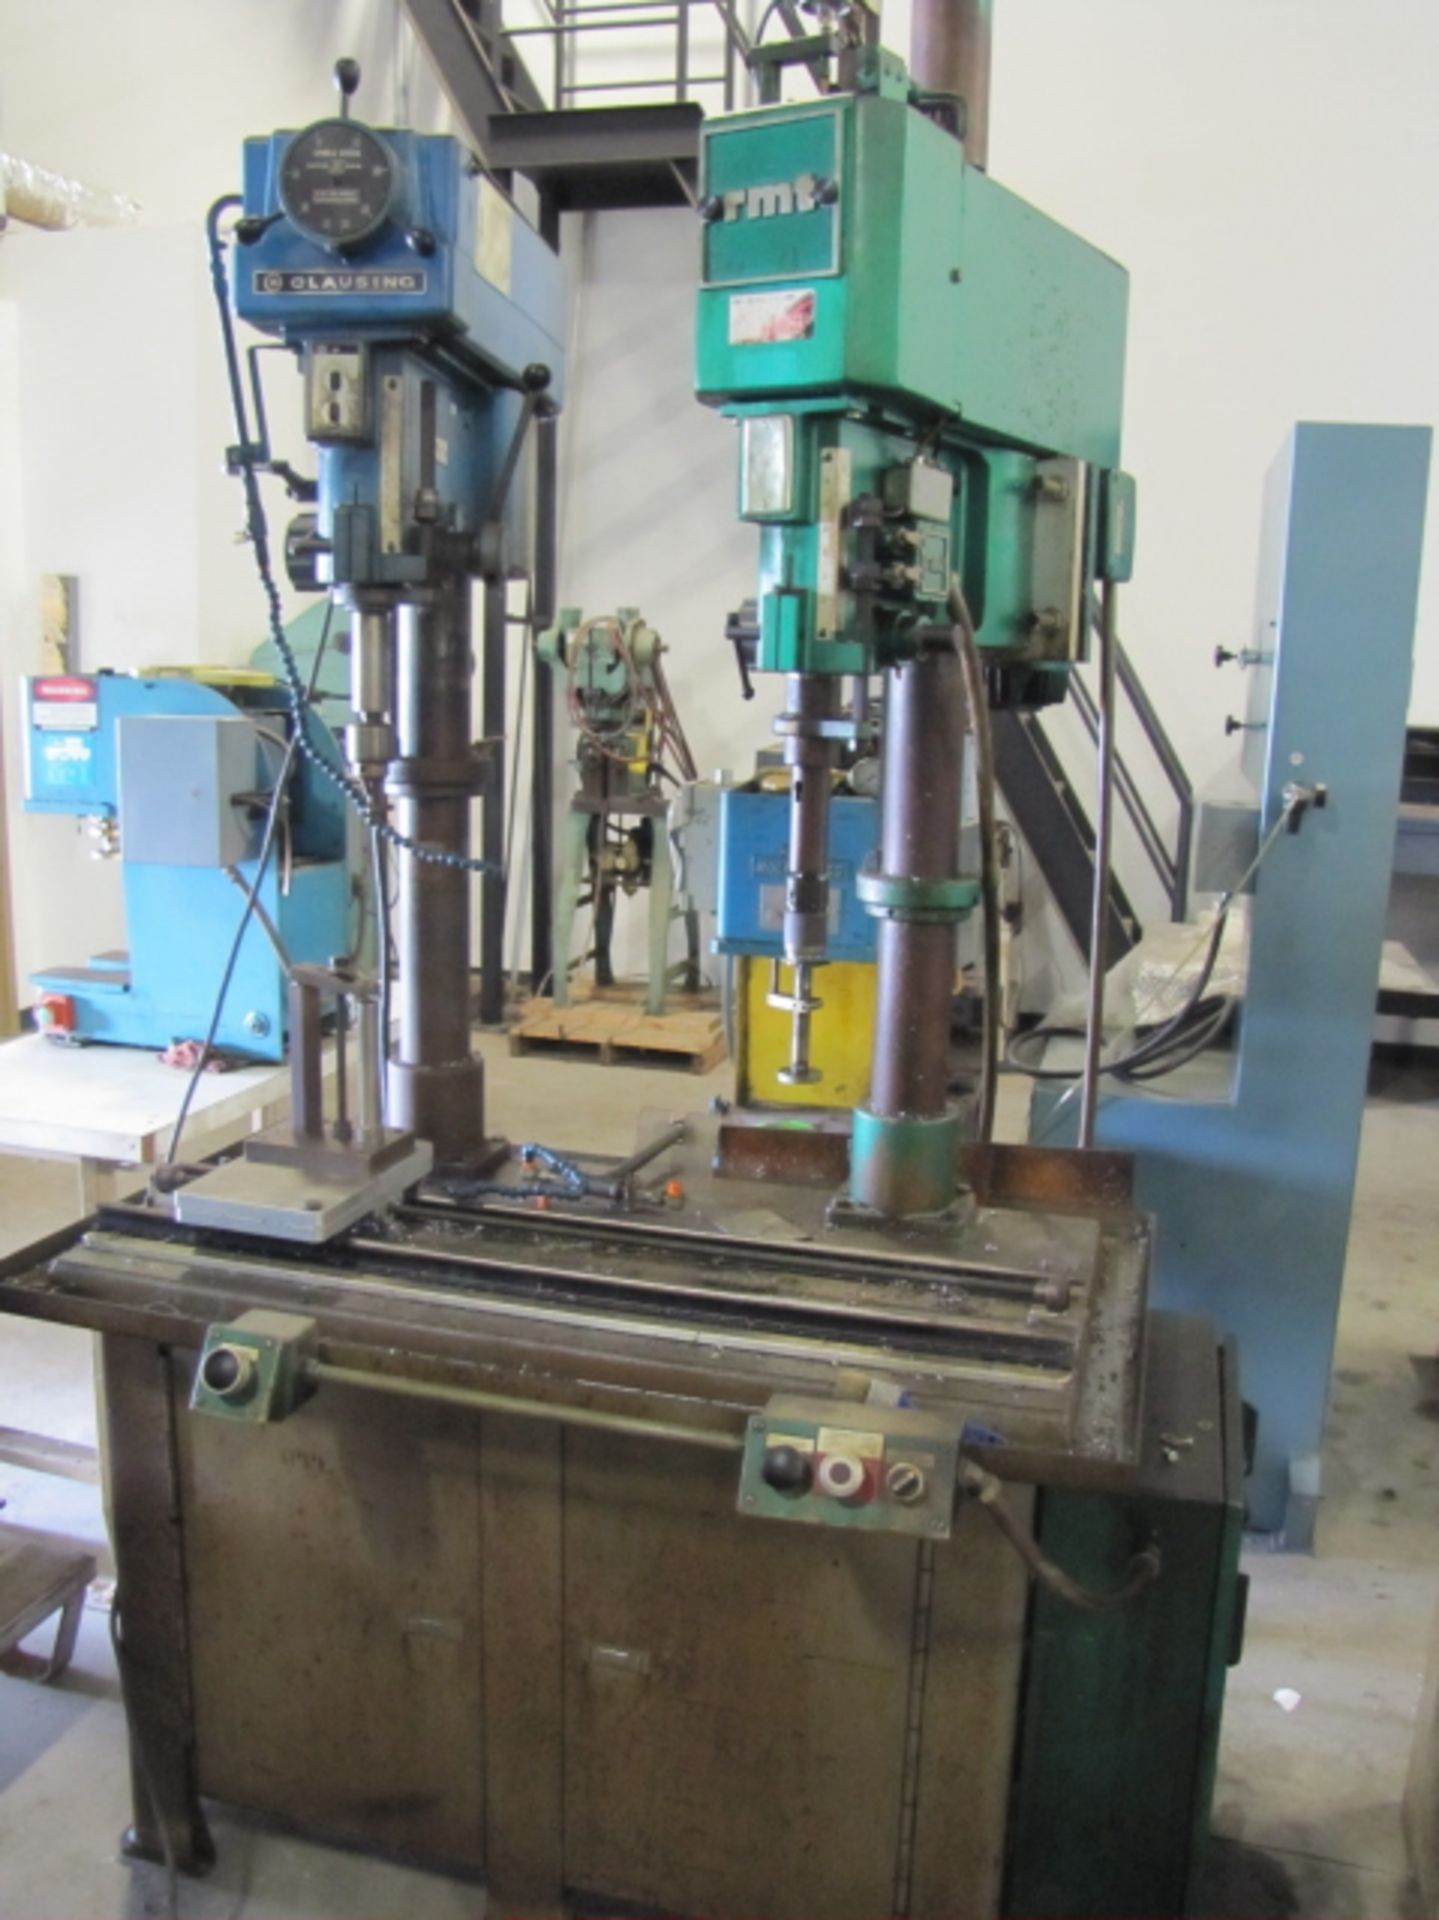 Dual Spindle Drill/Tap Setup: Clausing 2284 Variable Speed Drill, 20" Capacity, RMT Lead Screw